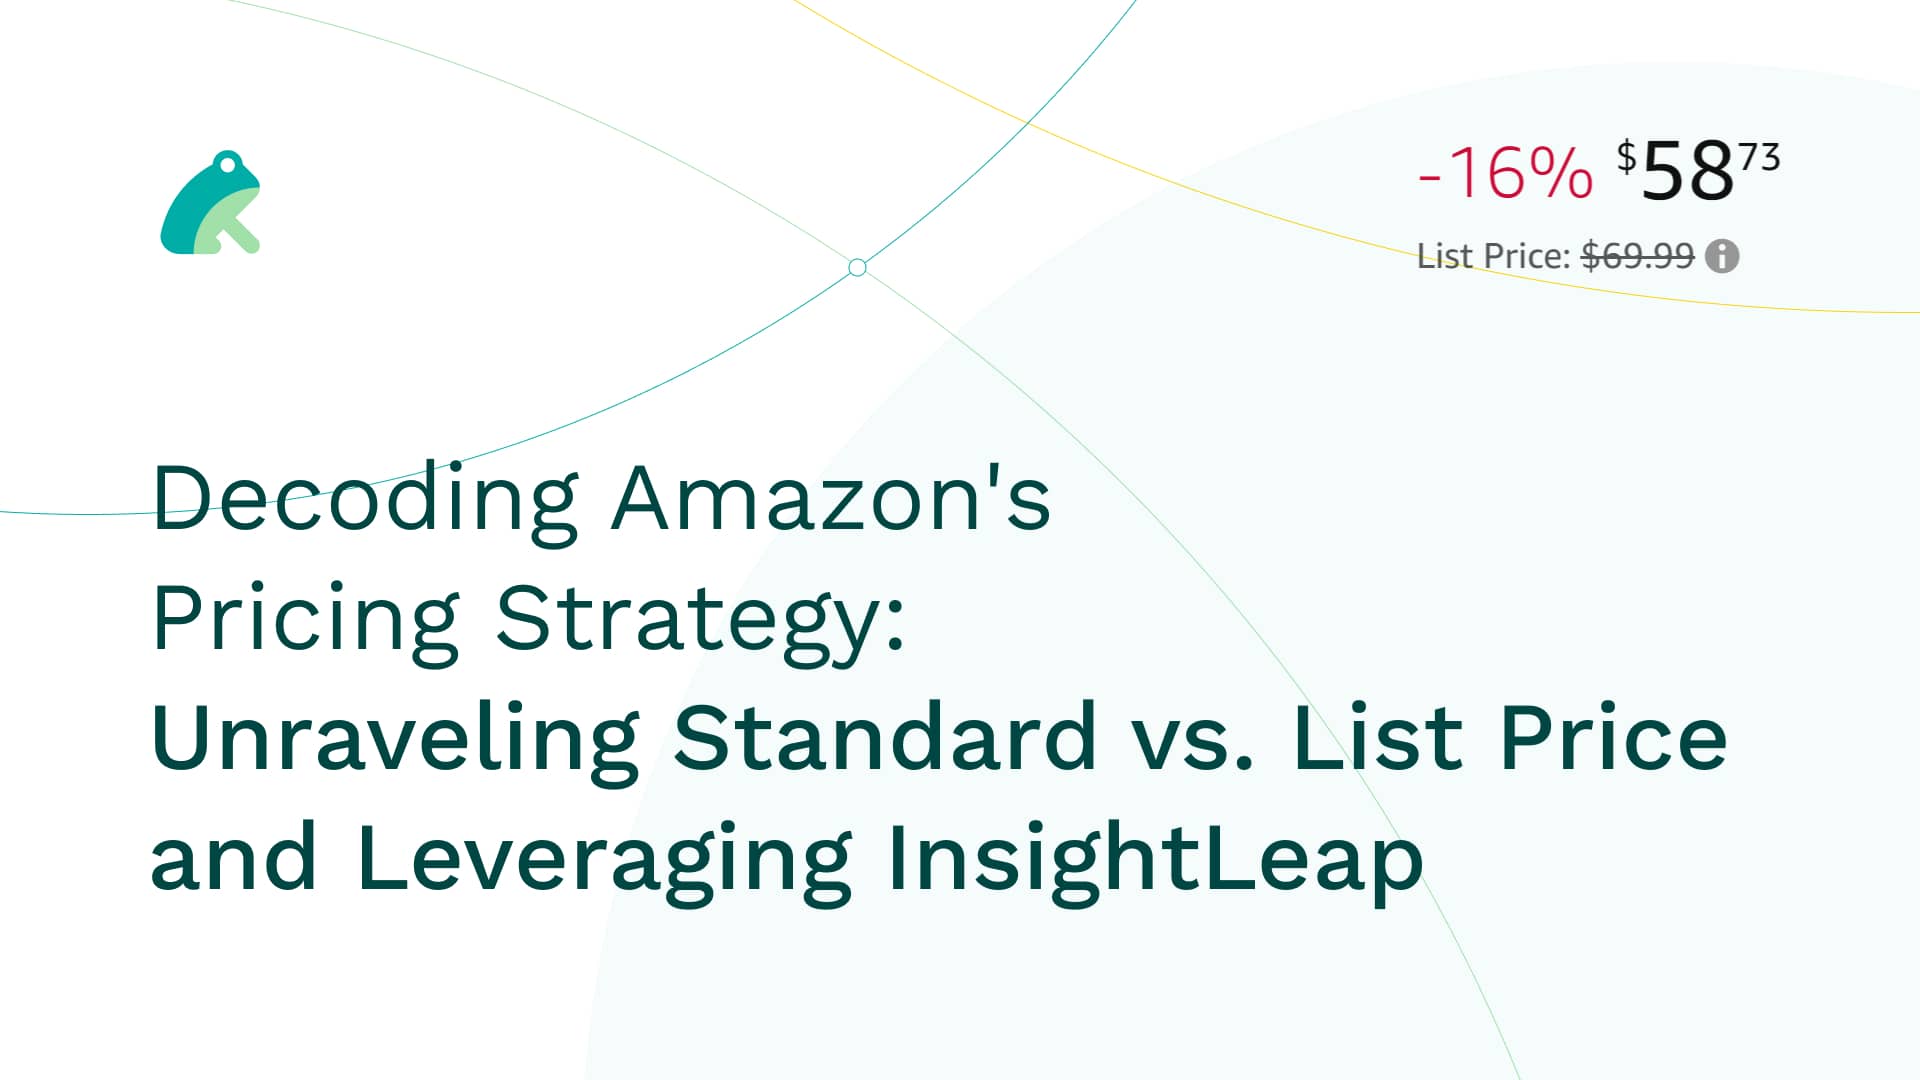 Decoding Amazon's Pricing Strategy: Unraveling Standard vs. List Price and Leveraging InsightLeap